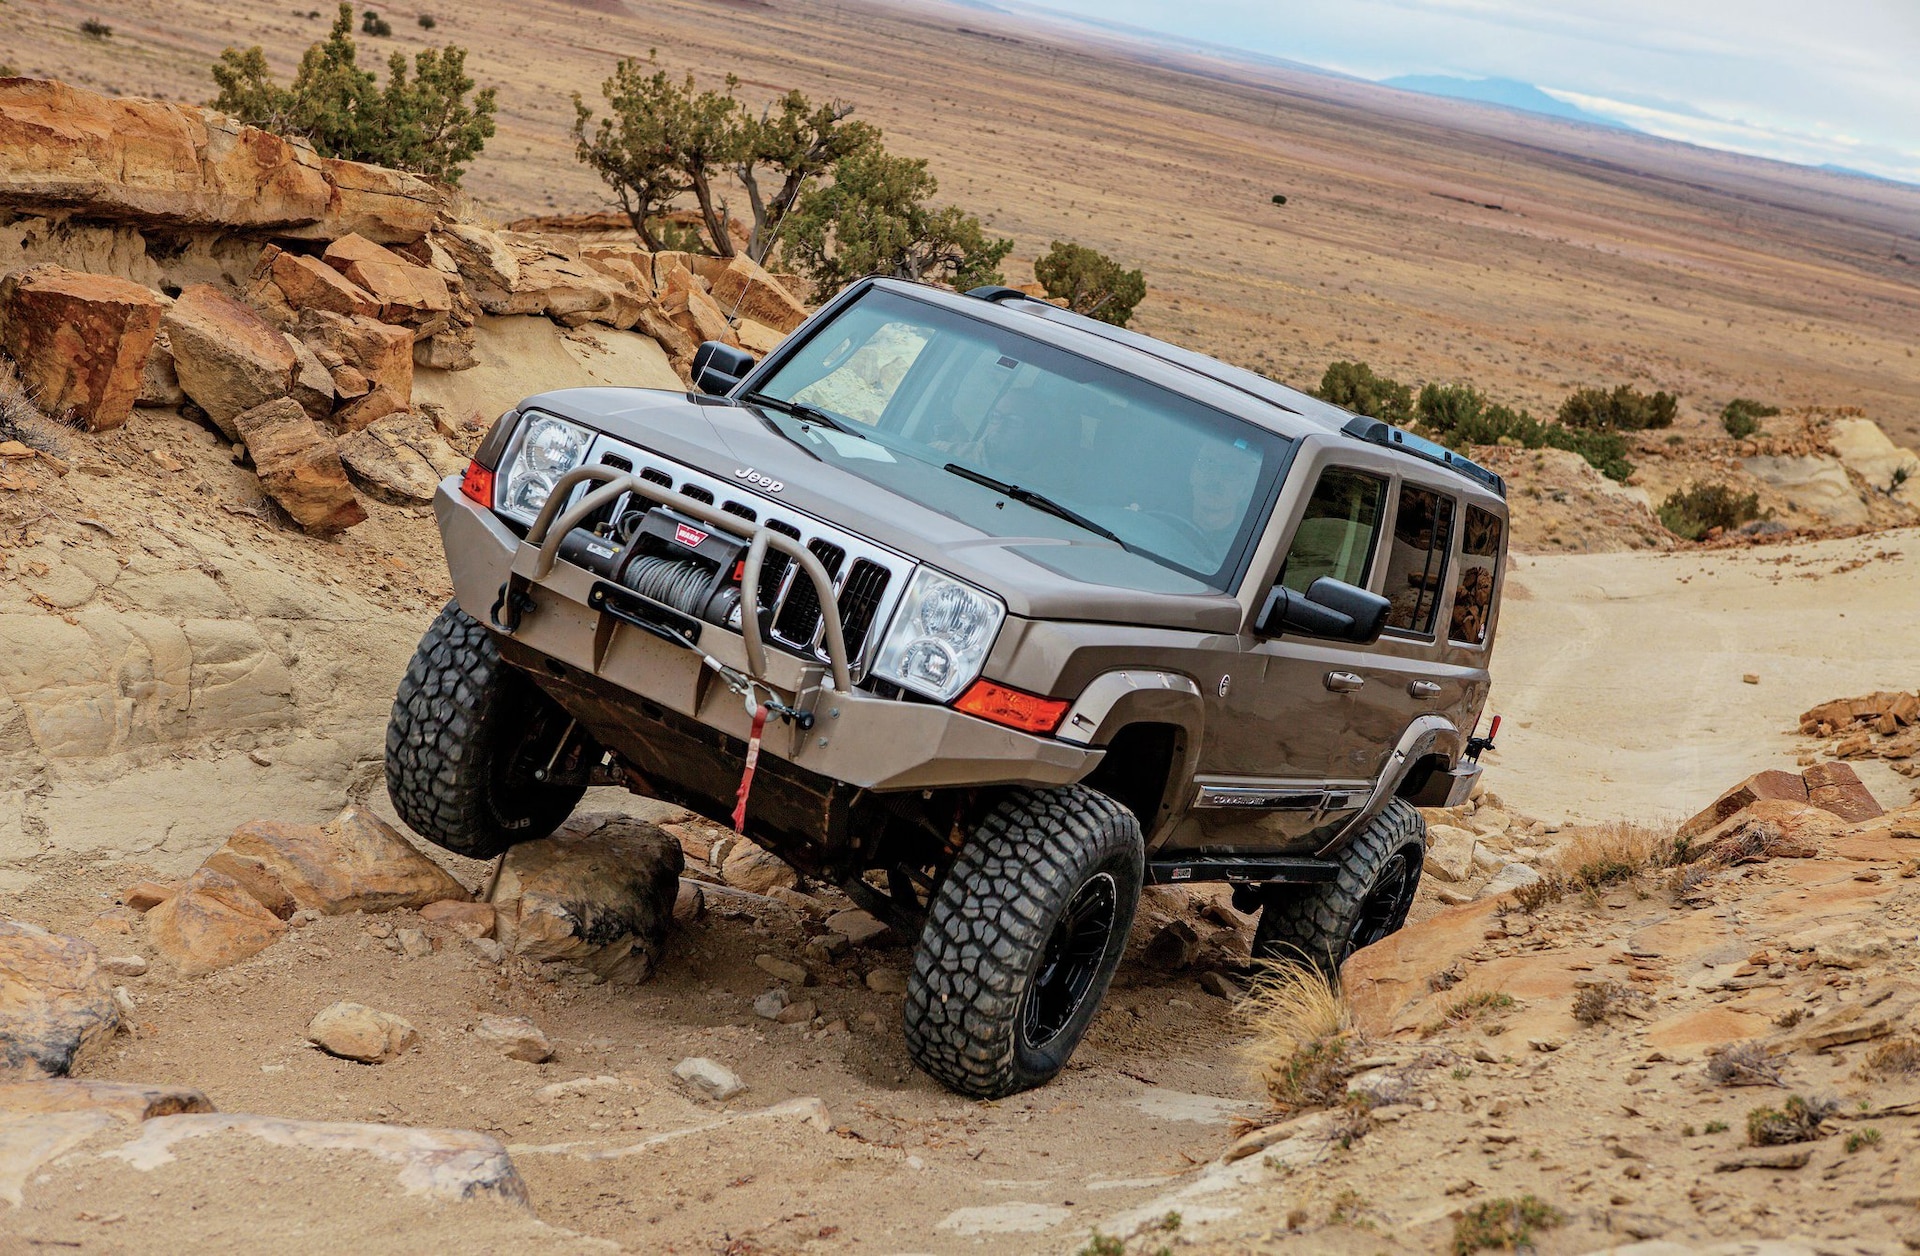 2006 Jeep Commander That Gets Wheeled Hard